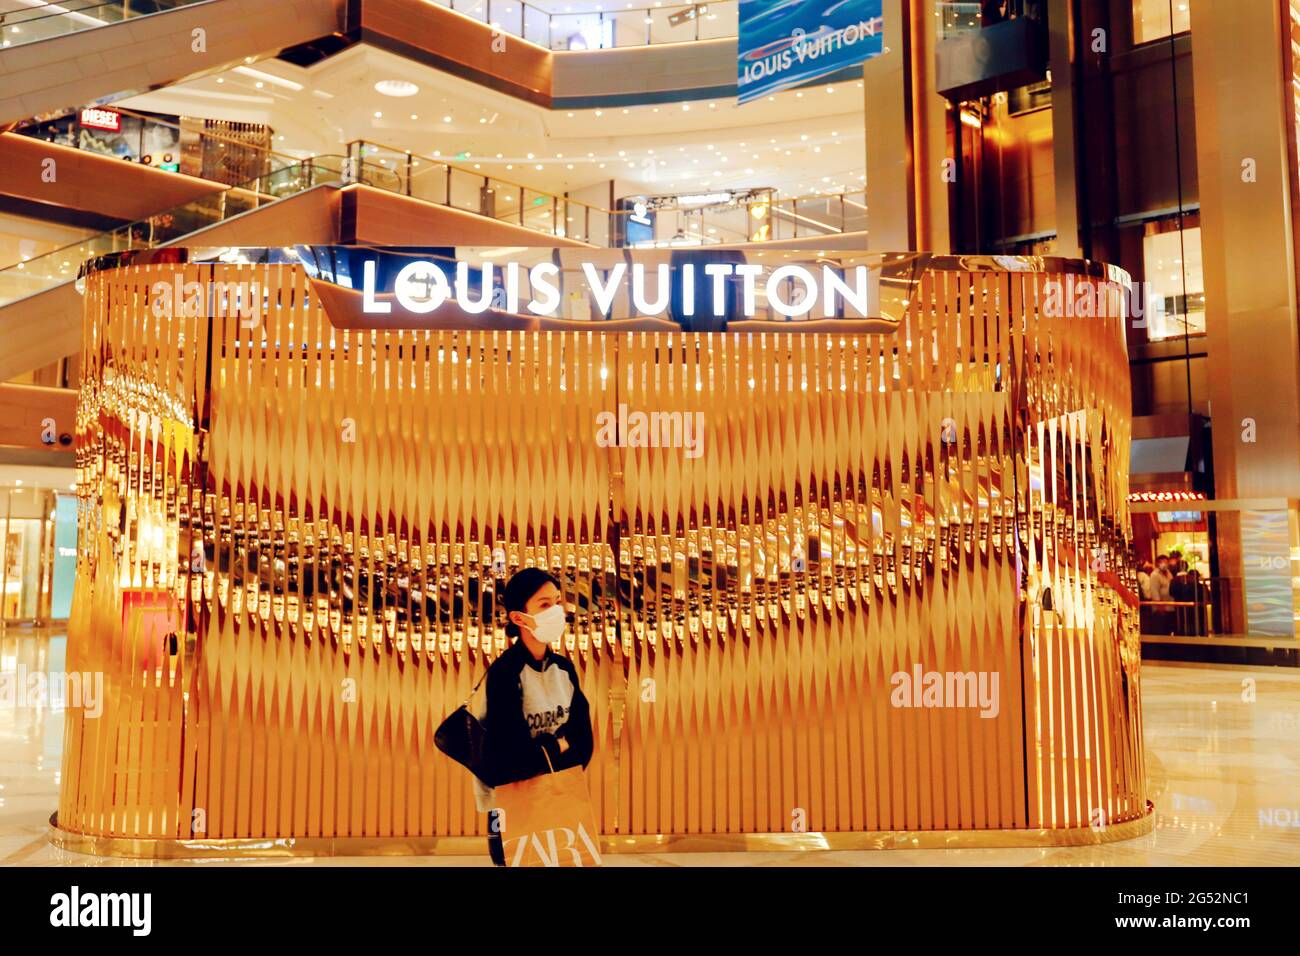 LV Louis Vuitton Fashion Store, Window Shop, Bags, Clothes and Shoes on  Display for Sale, Modern Louis Vuitton Fashion House Editorial Stock Image  - Image of fashion, footwear: 175648059